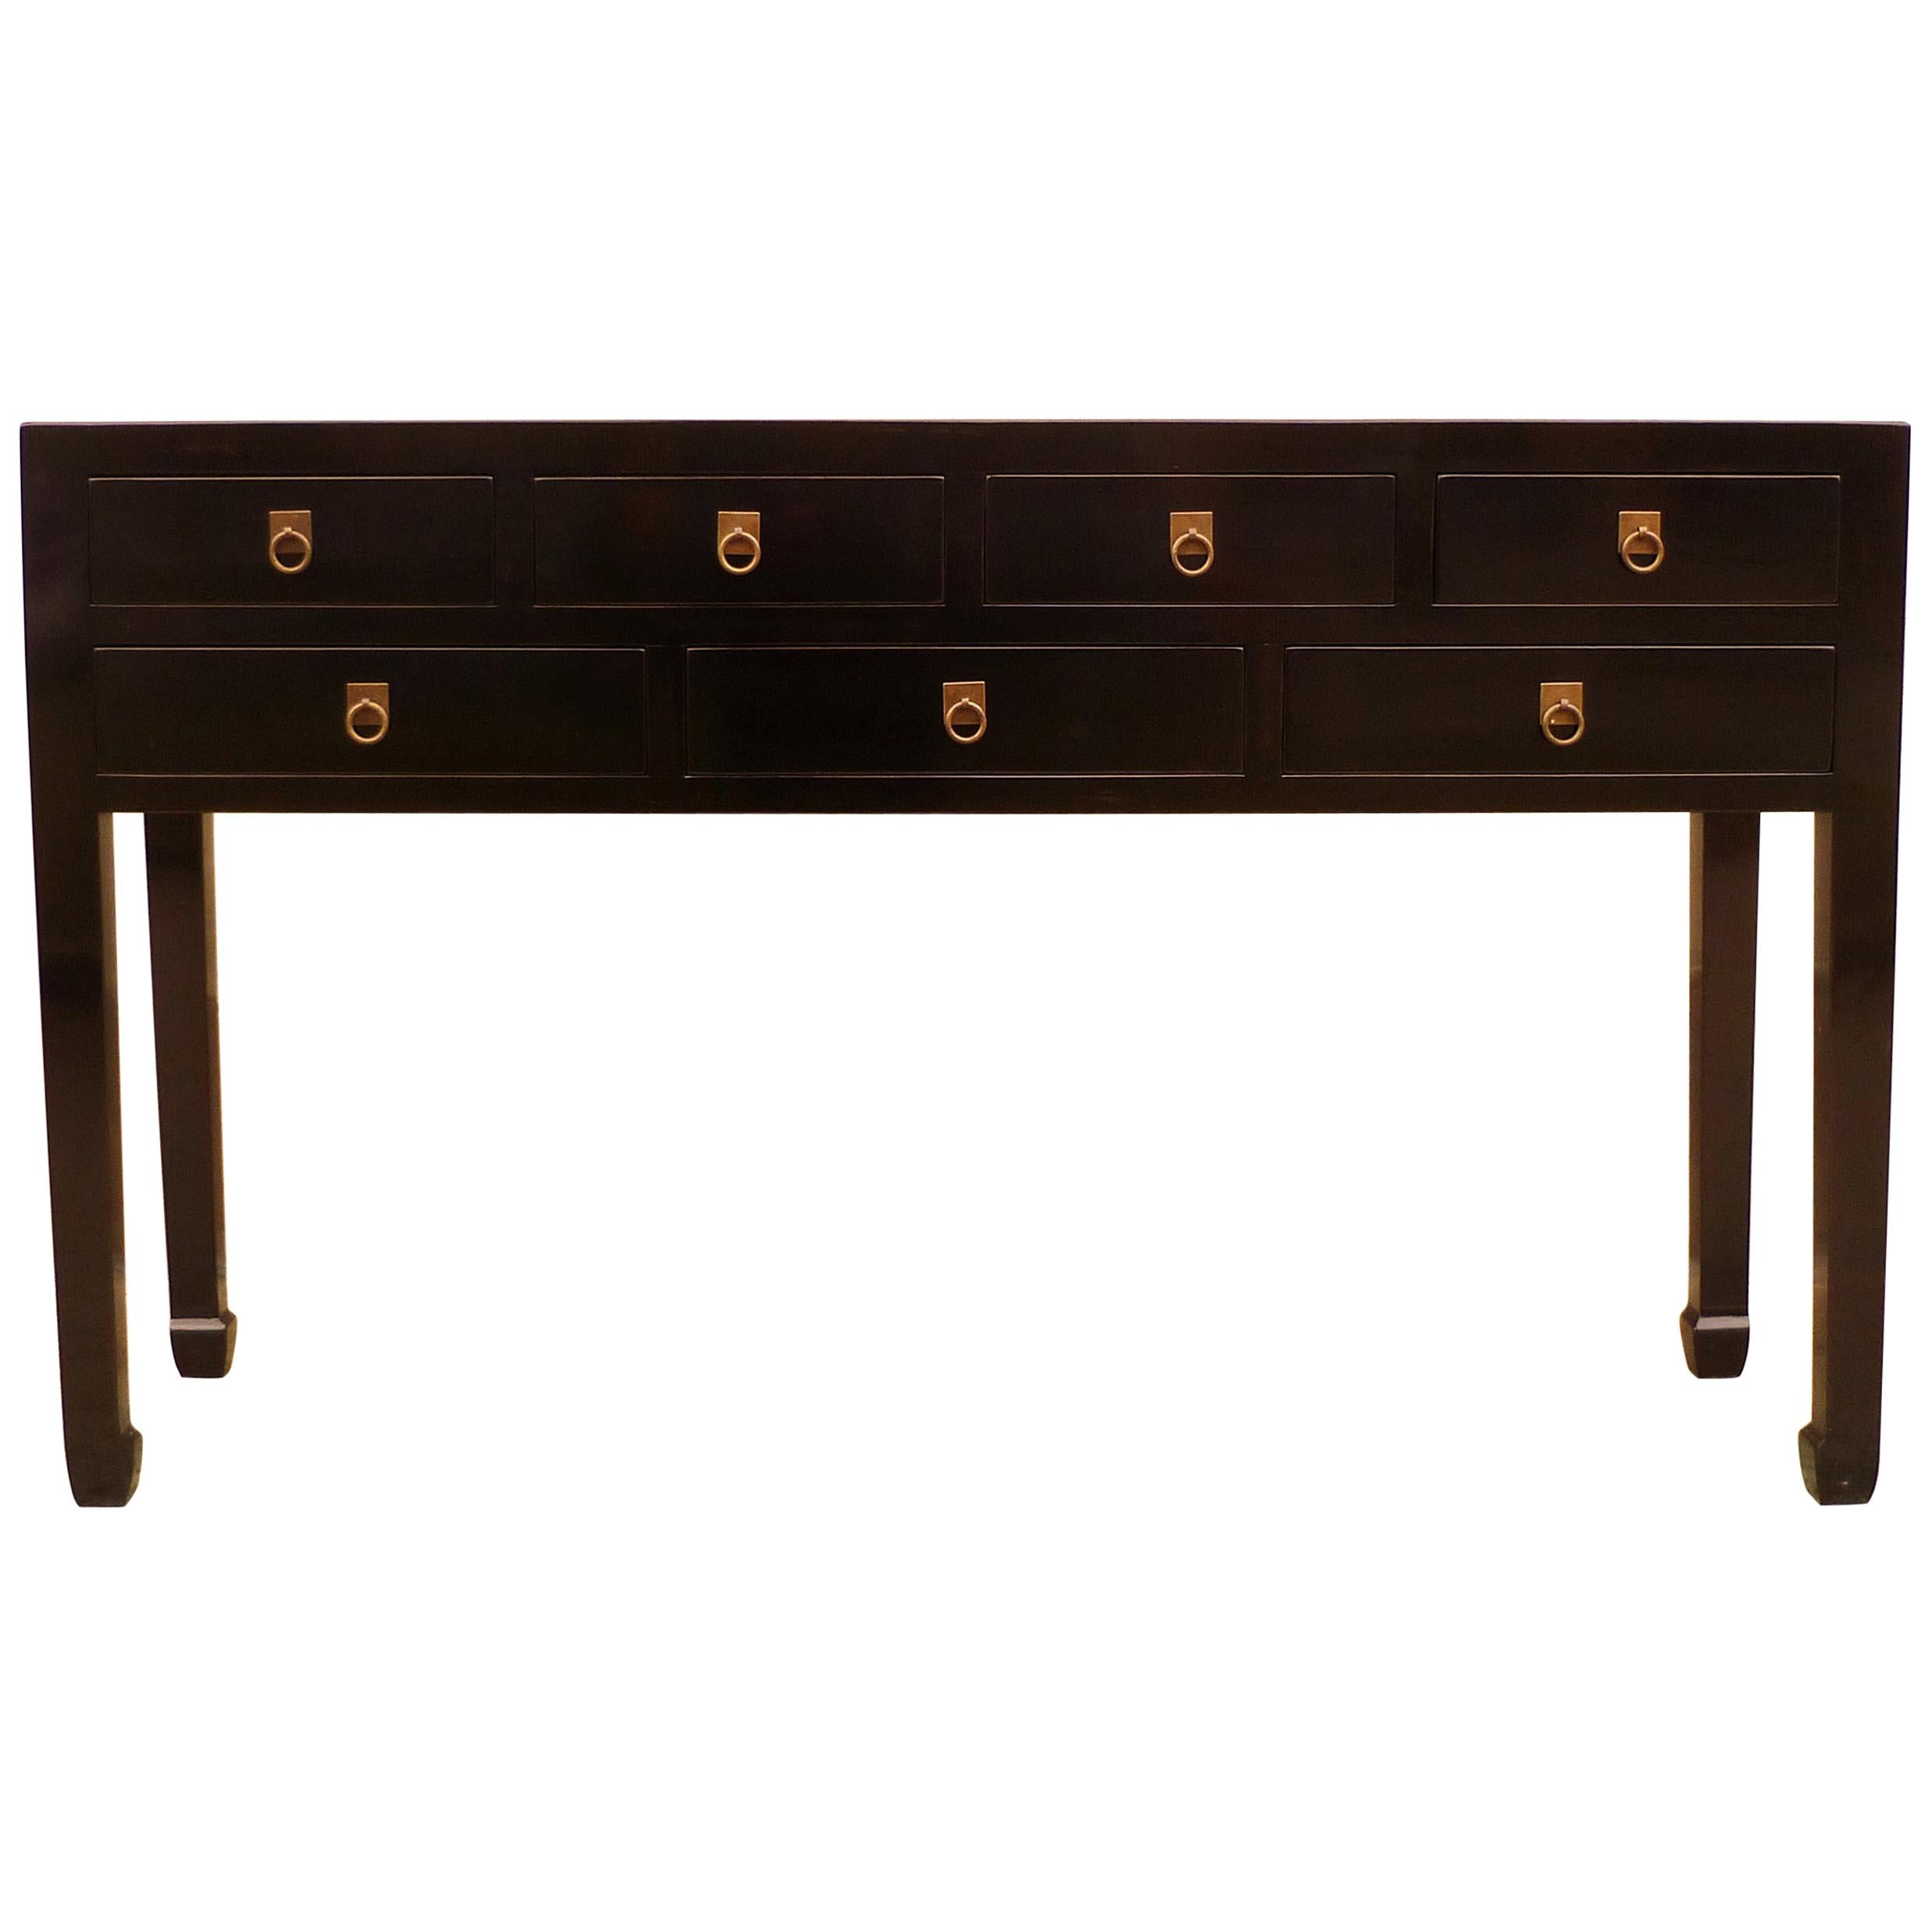 Fined Black Lacquer Console Table with Drawers